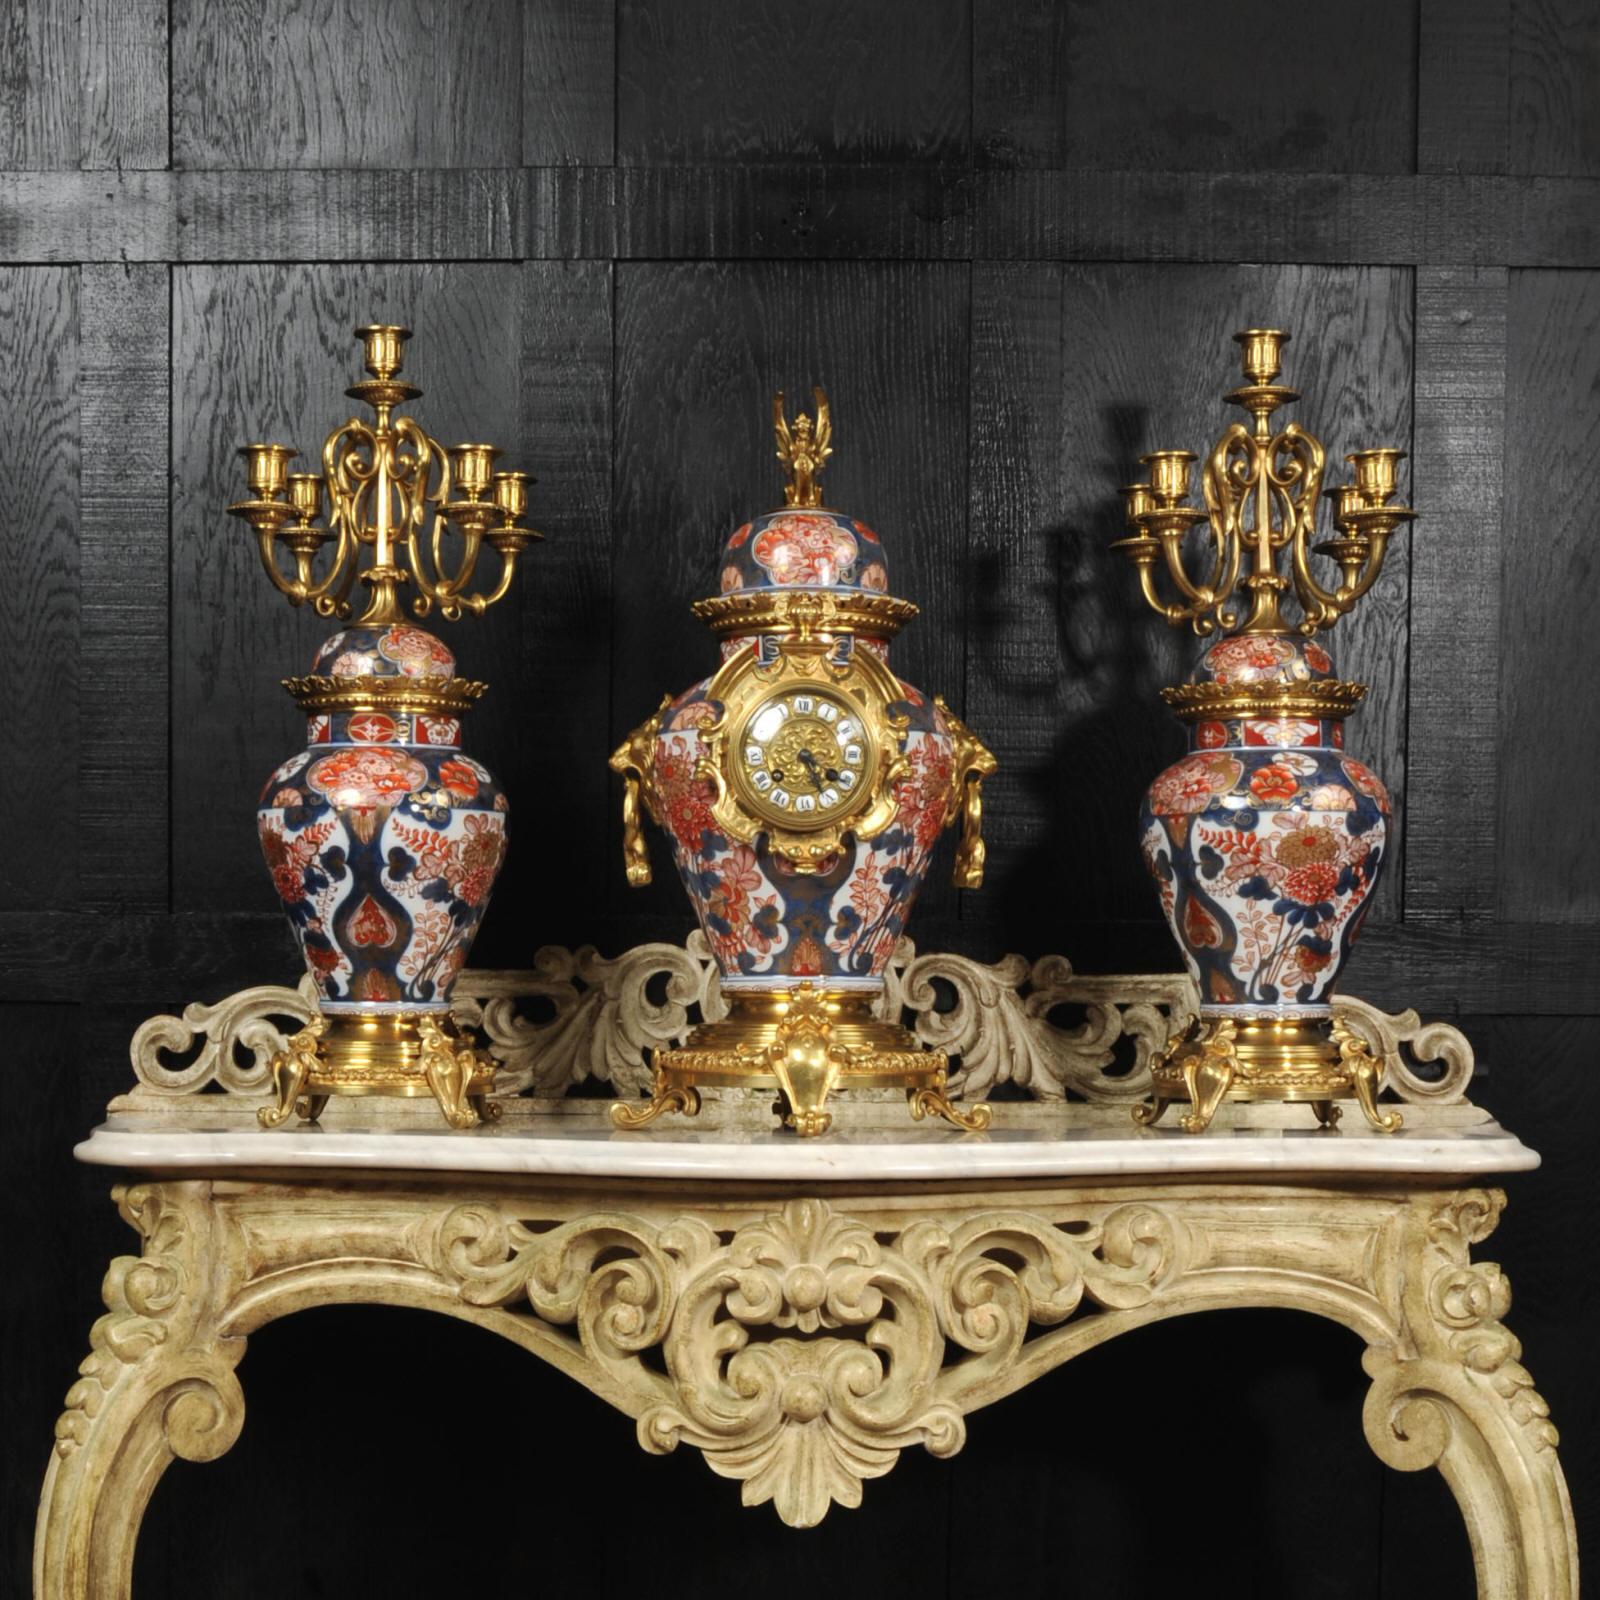 A very large, rare and impressive original antique clock set. The bodies are stunning Japanese Imari Porcelain mounted with finely gilded bronze. Candelabra are formed from a matching pair of Japanese Imari Porcelain jars of inverted pear form